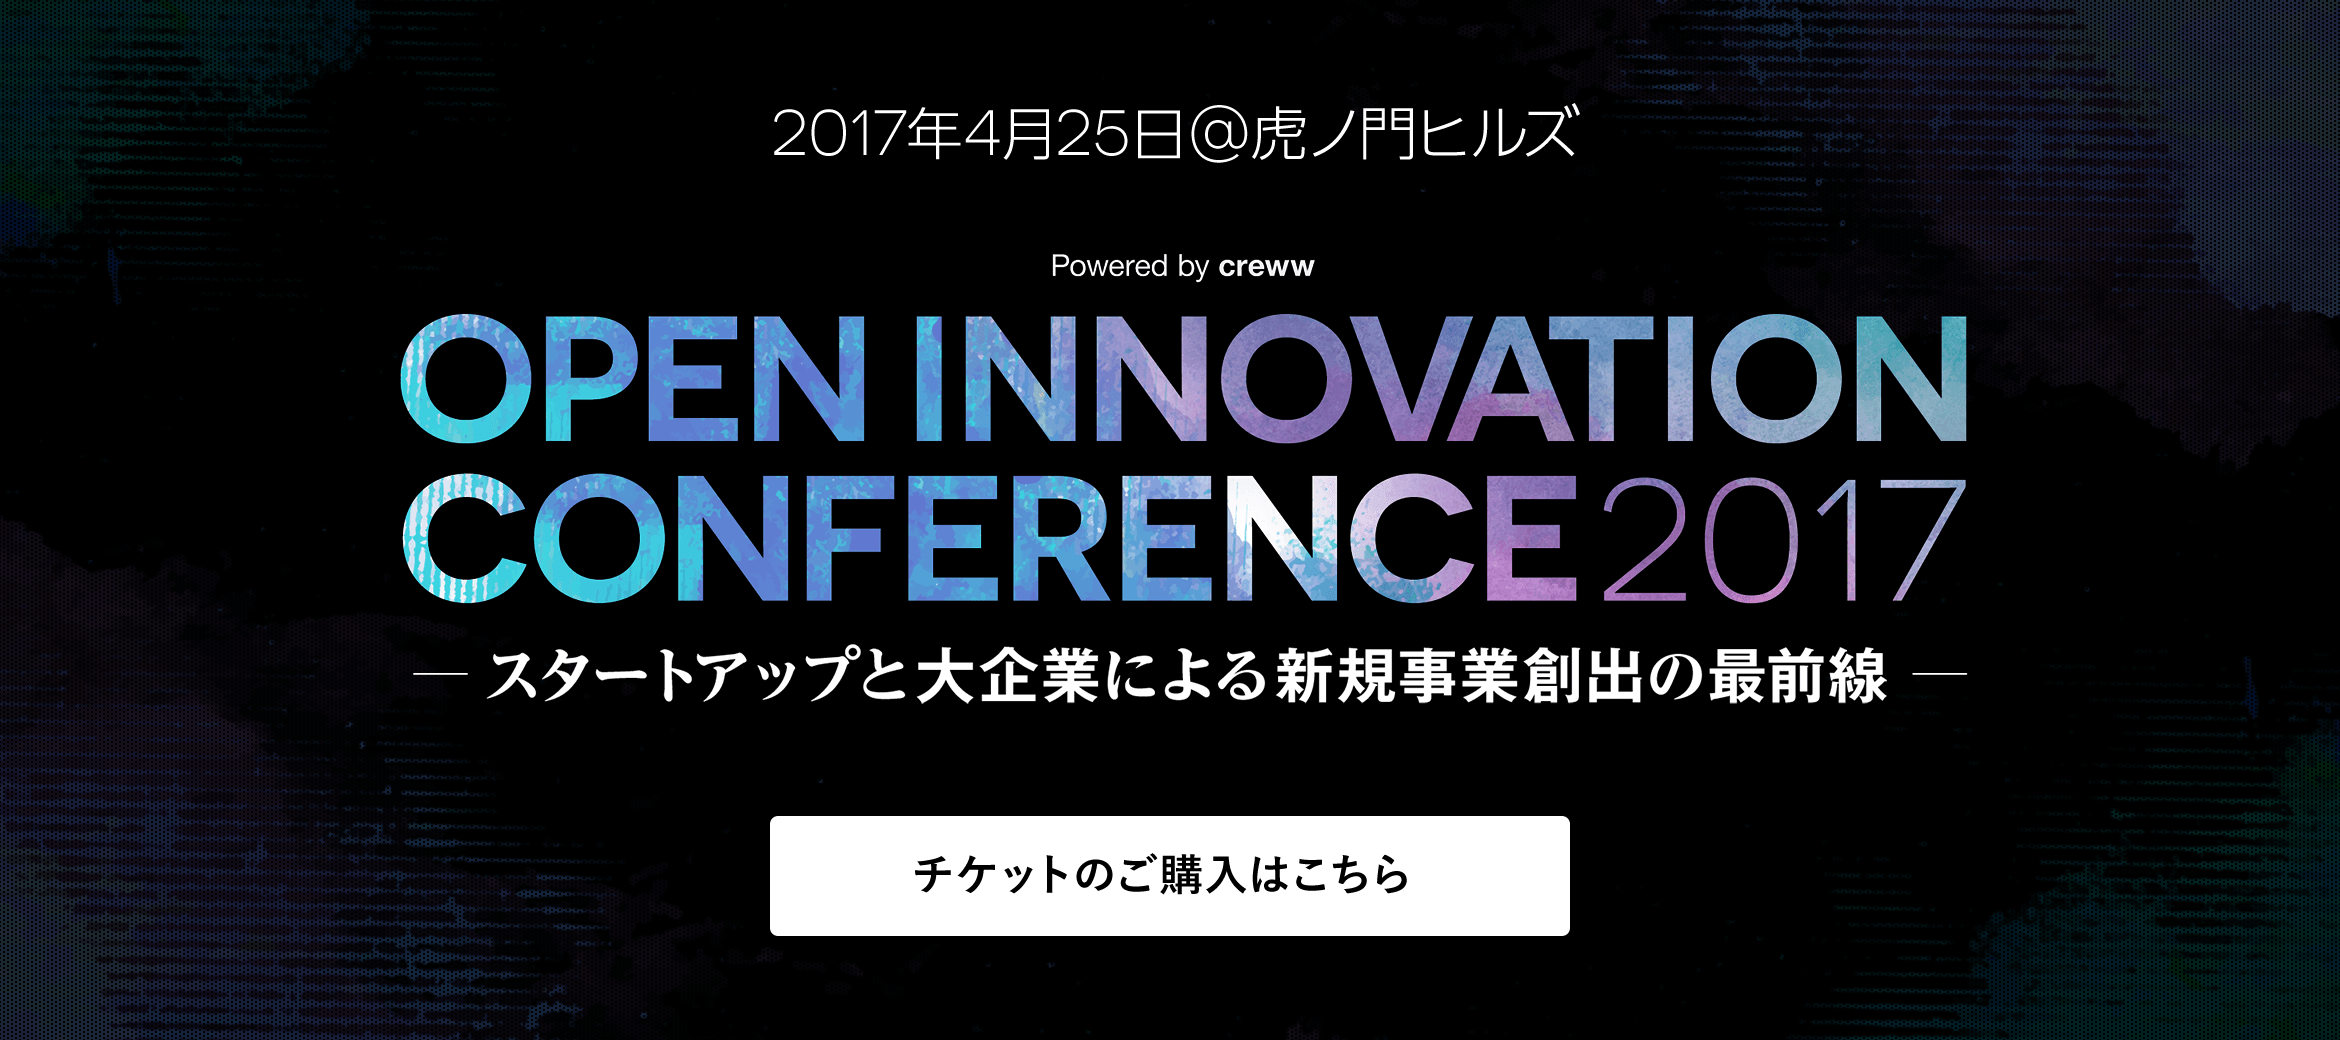 openinnovation-conference-2017